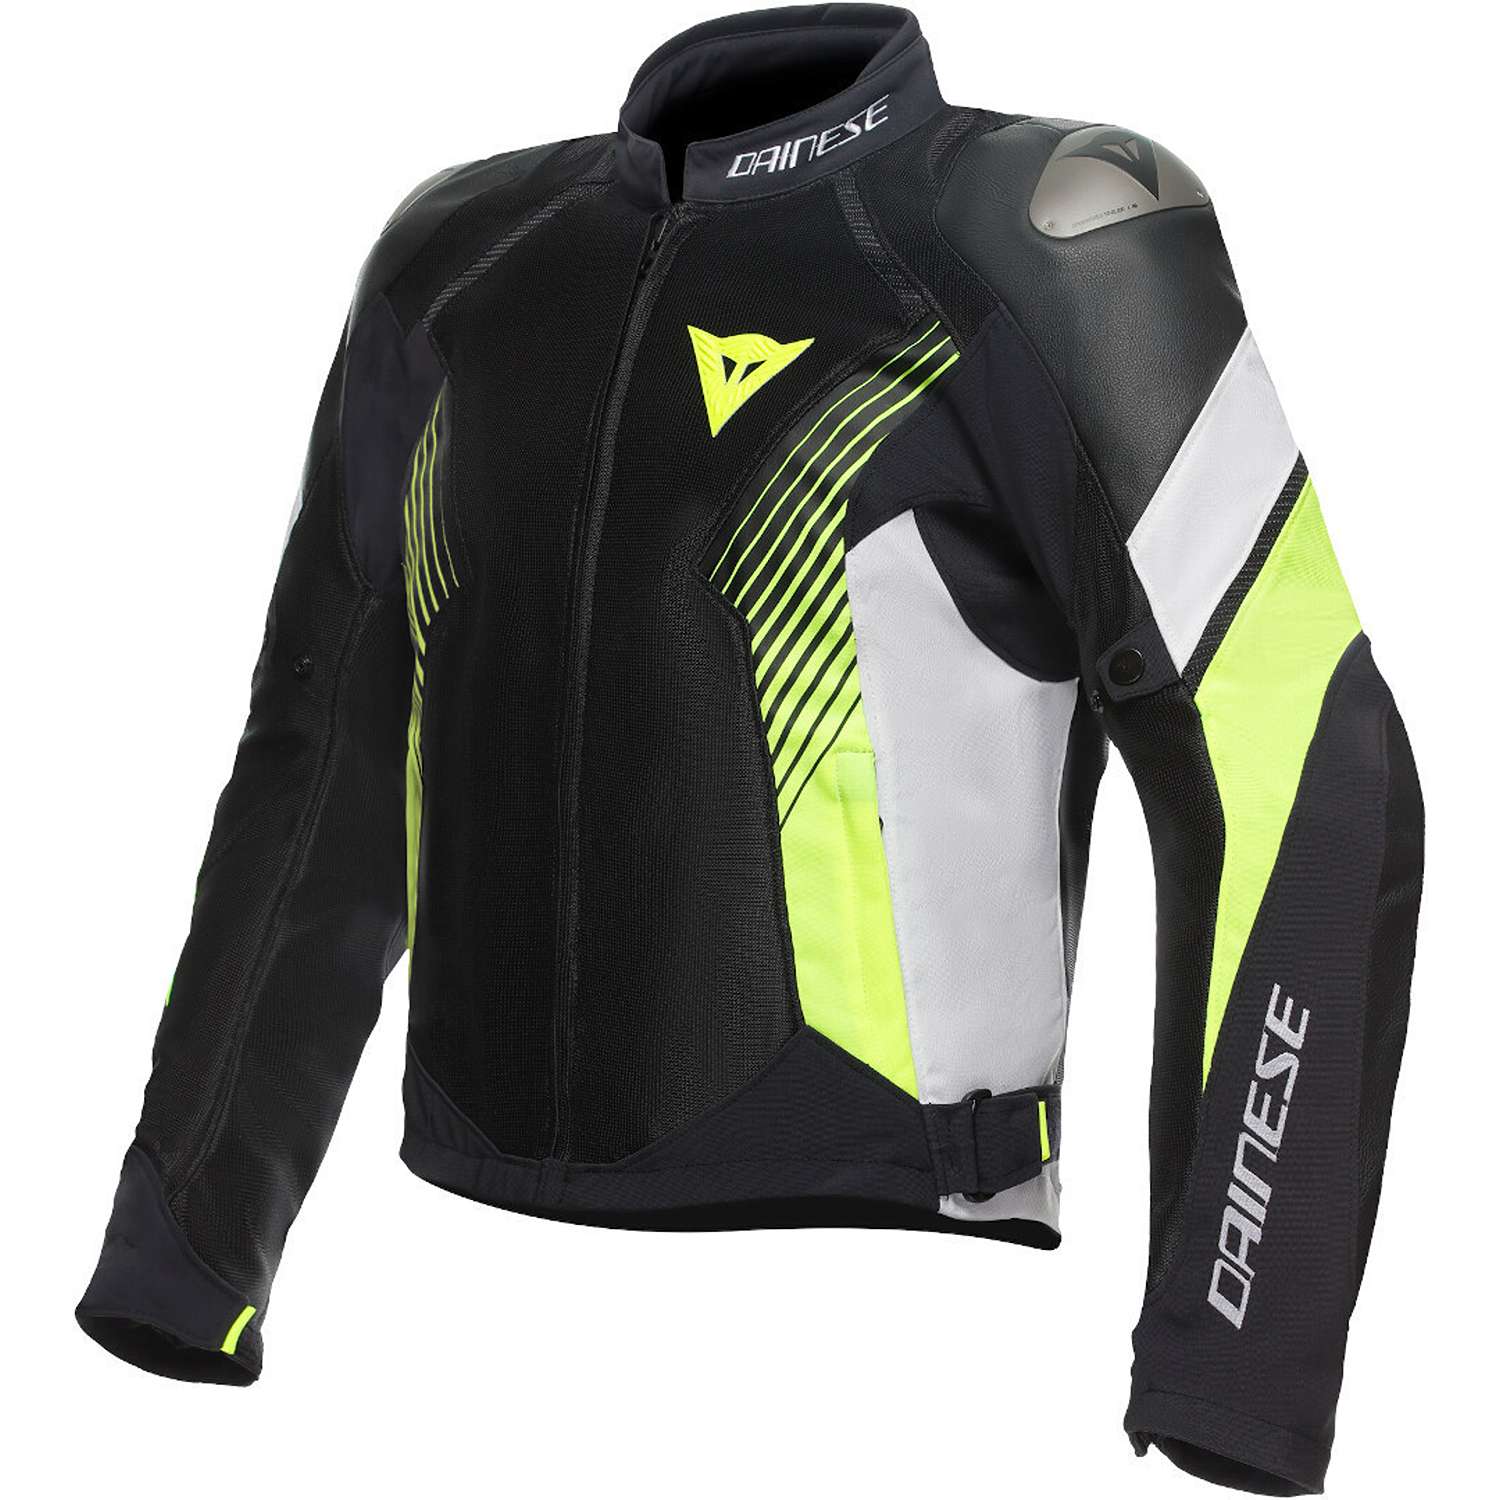 Image of EU Dainese Super Rider 2 Absoluteshell Jacket Black White Fluo Yellow Taille 56